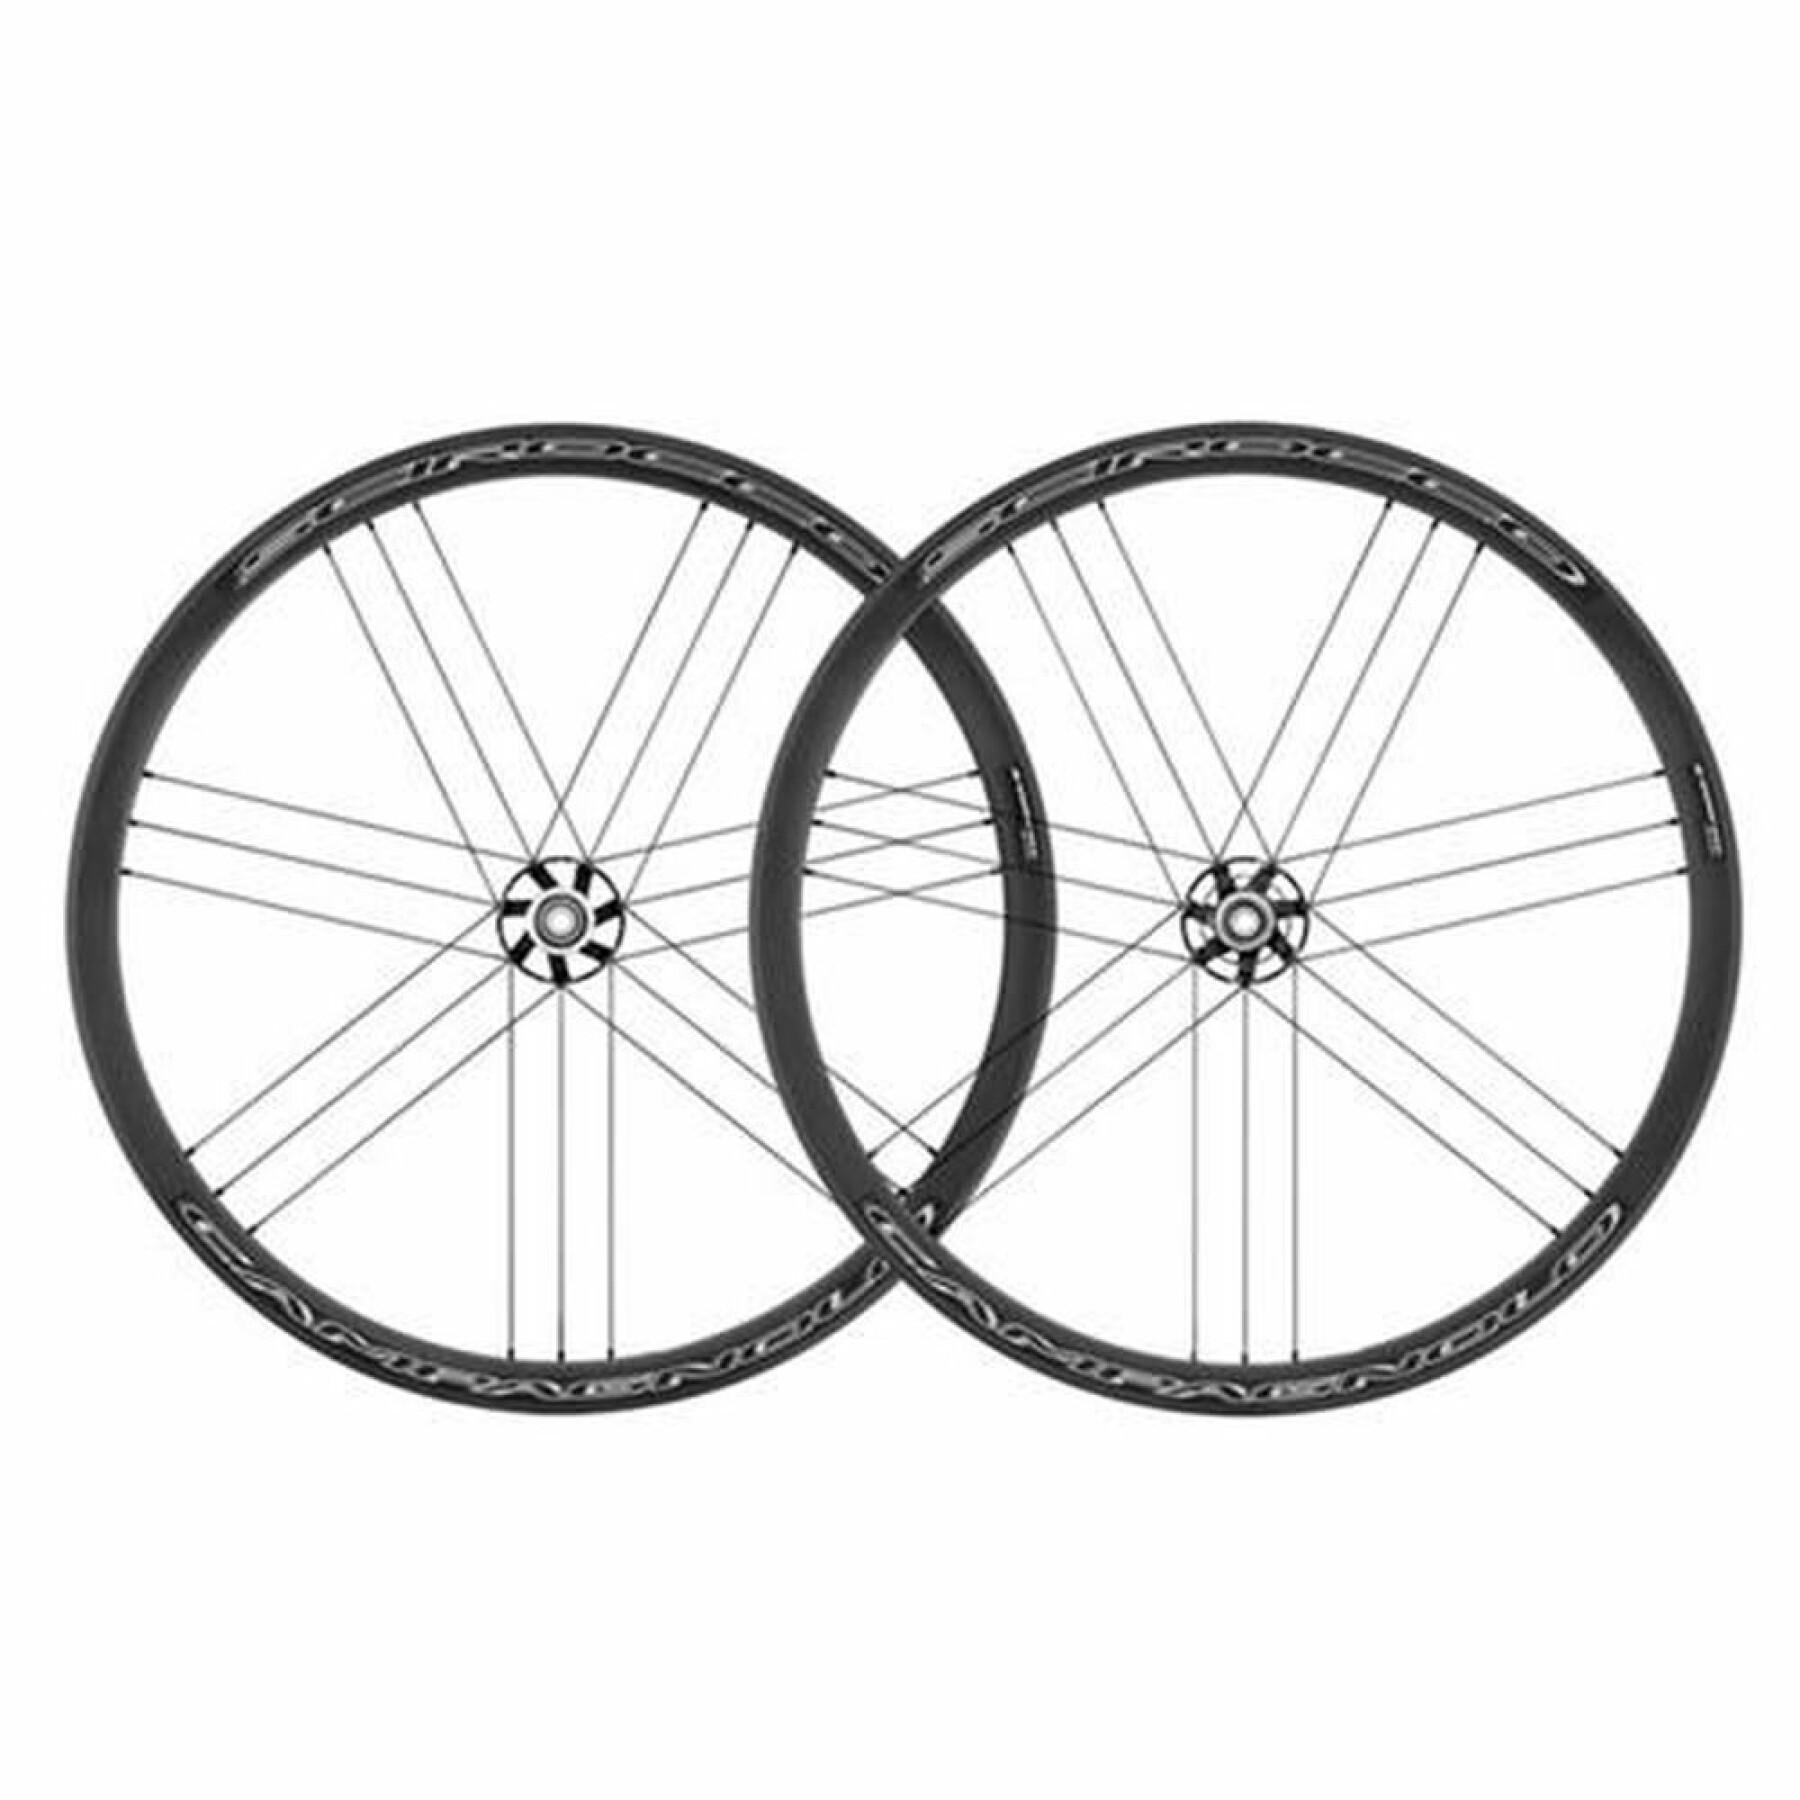 Roues à disque Campagnolo scirocco DB 2wf tubeless ready hh12 Shimano